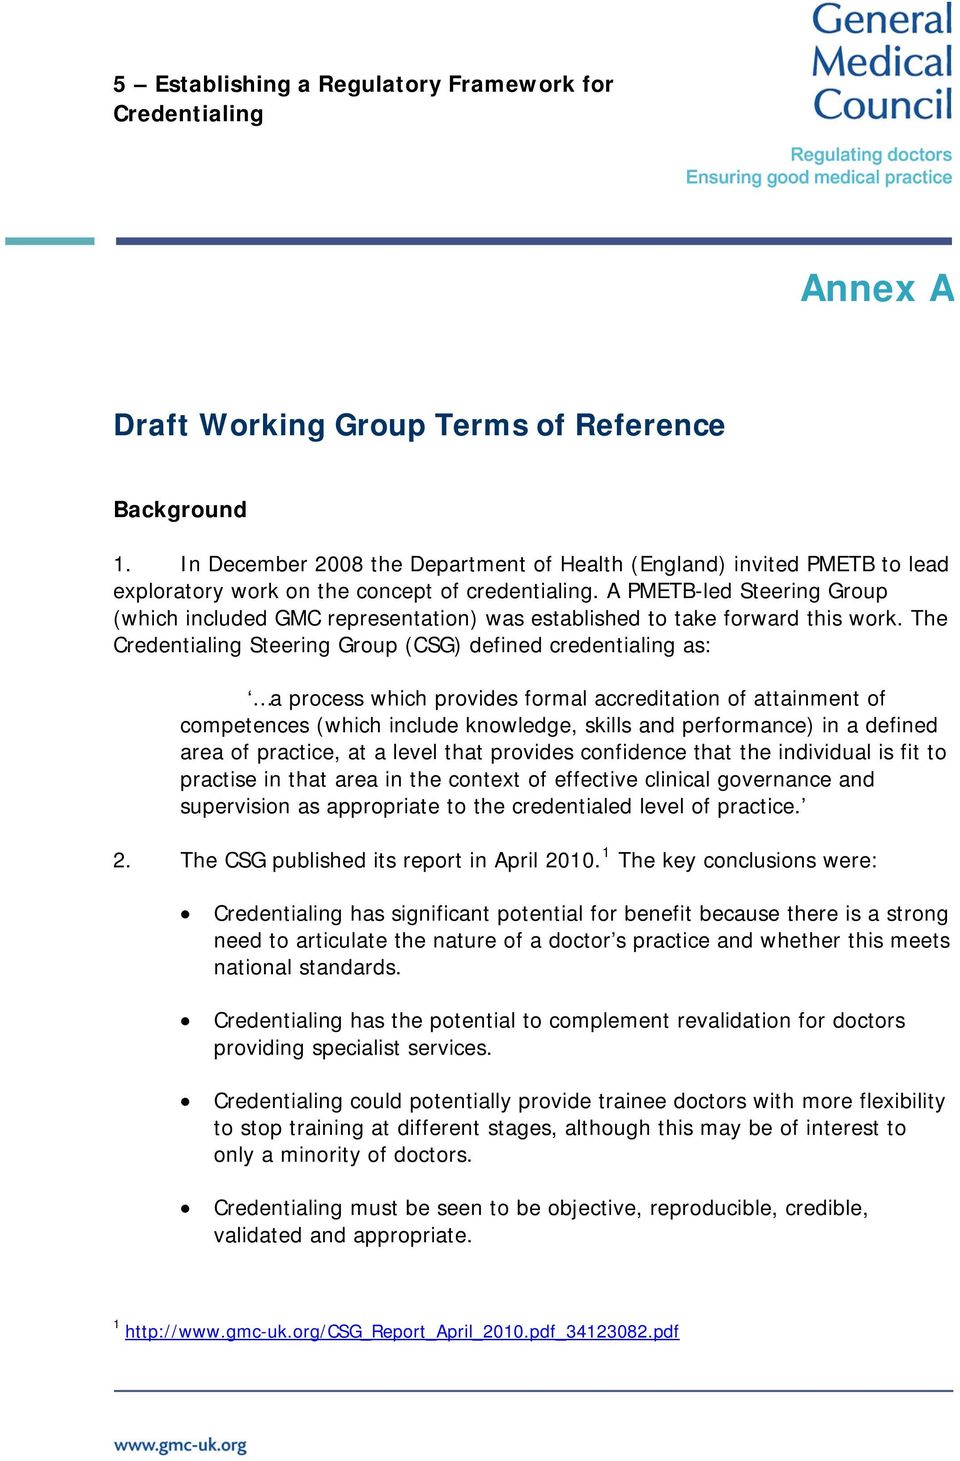 A PMETB-led Steering Group (which included GMC representation) was established to take forward this work.